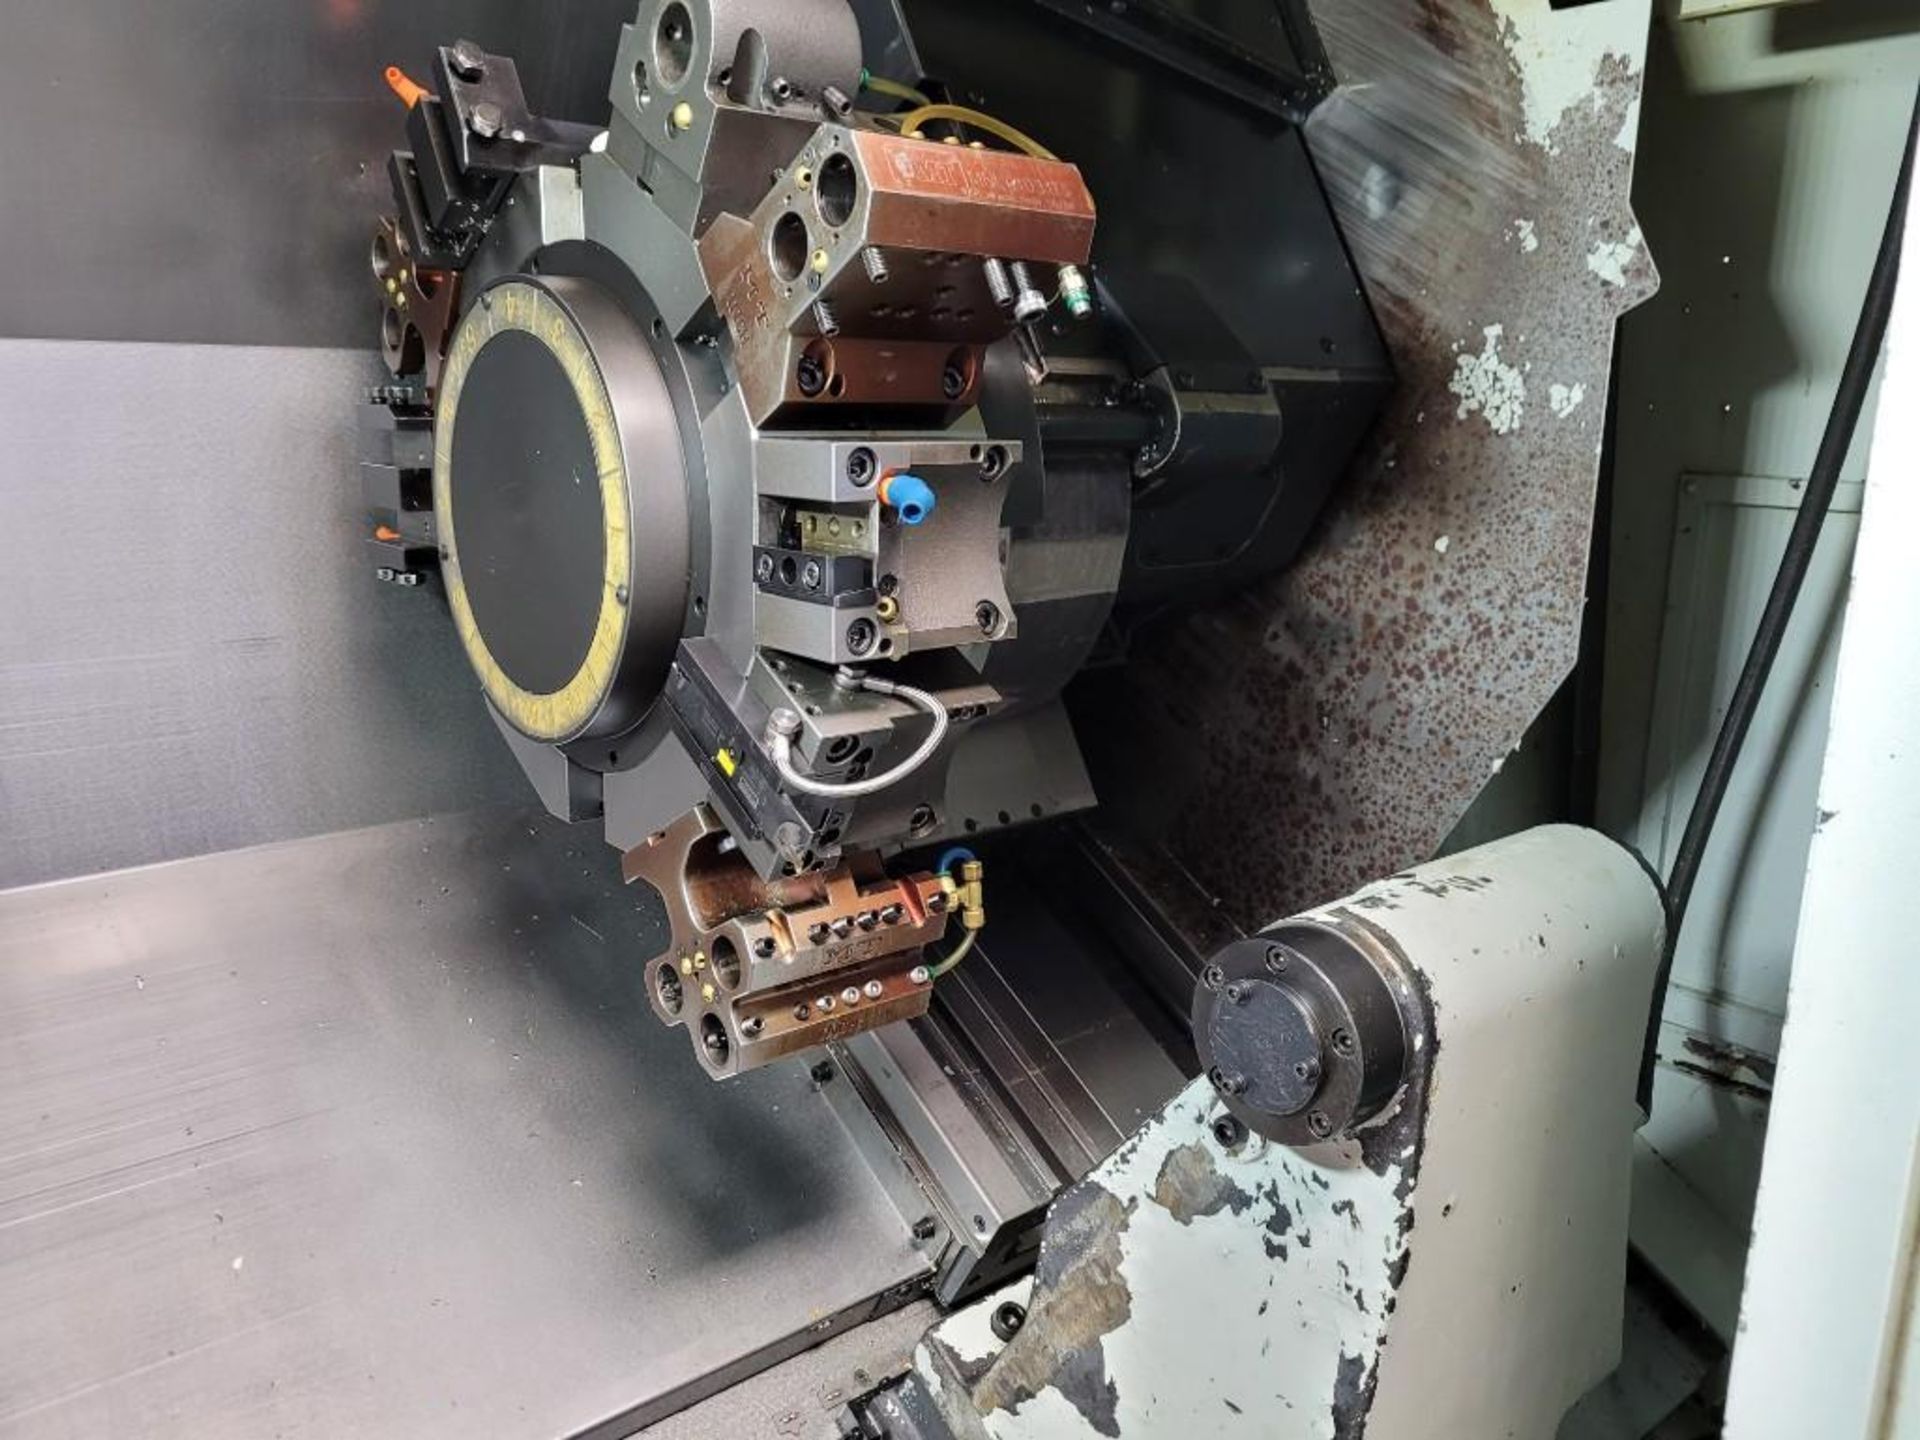 Mori Seiki NL2000Y CNC Turning Center, MSX-850 Control, Y-Axis, Collet Chuck, New 2005 - Image 8 of 14